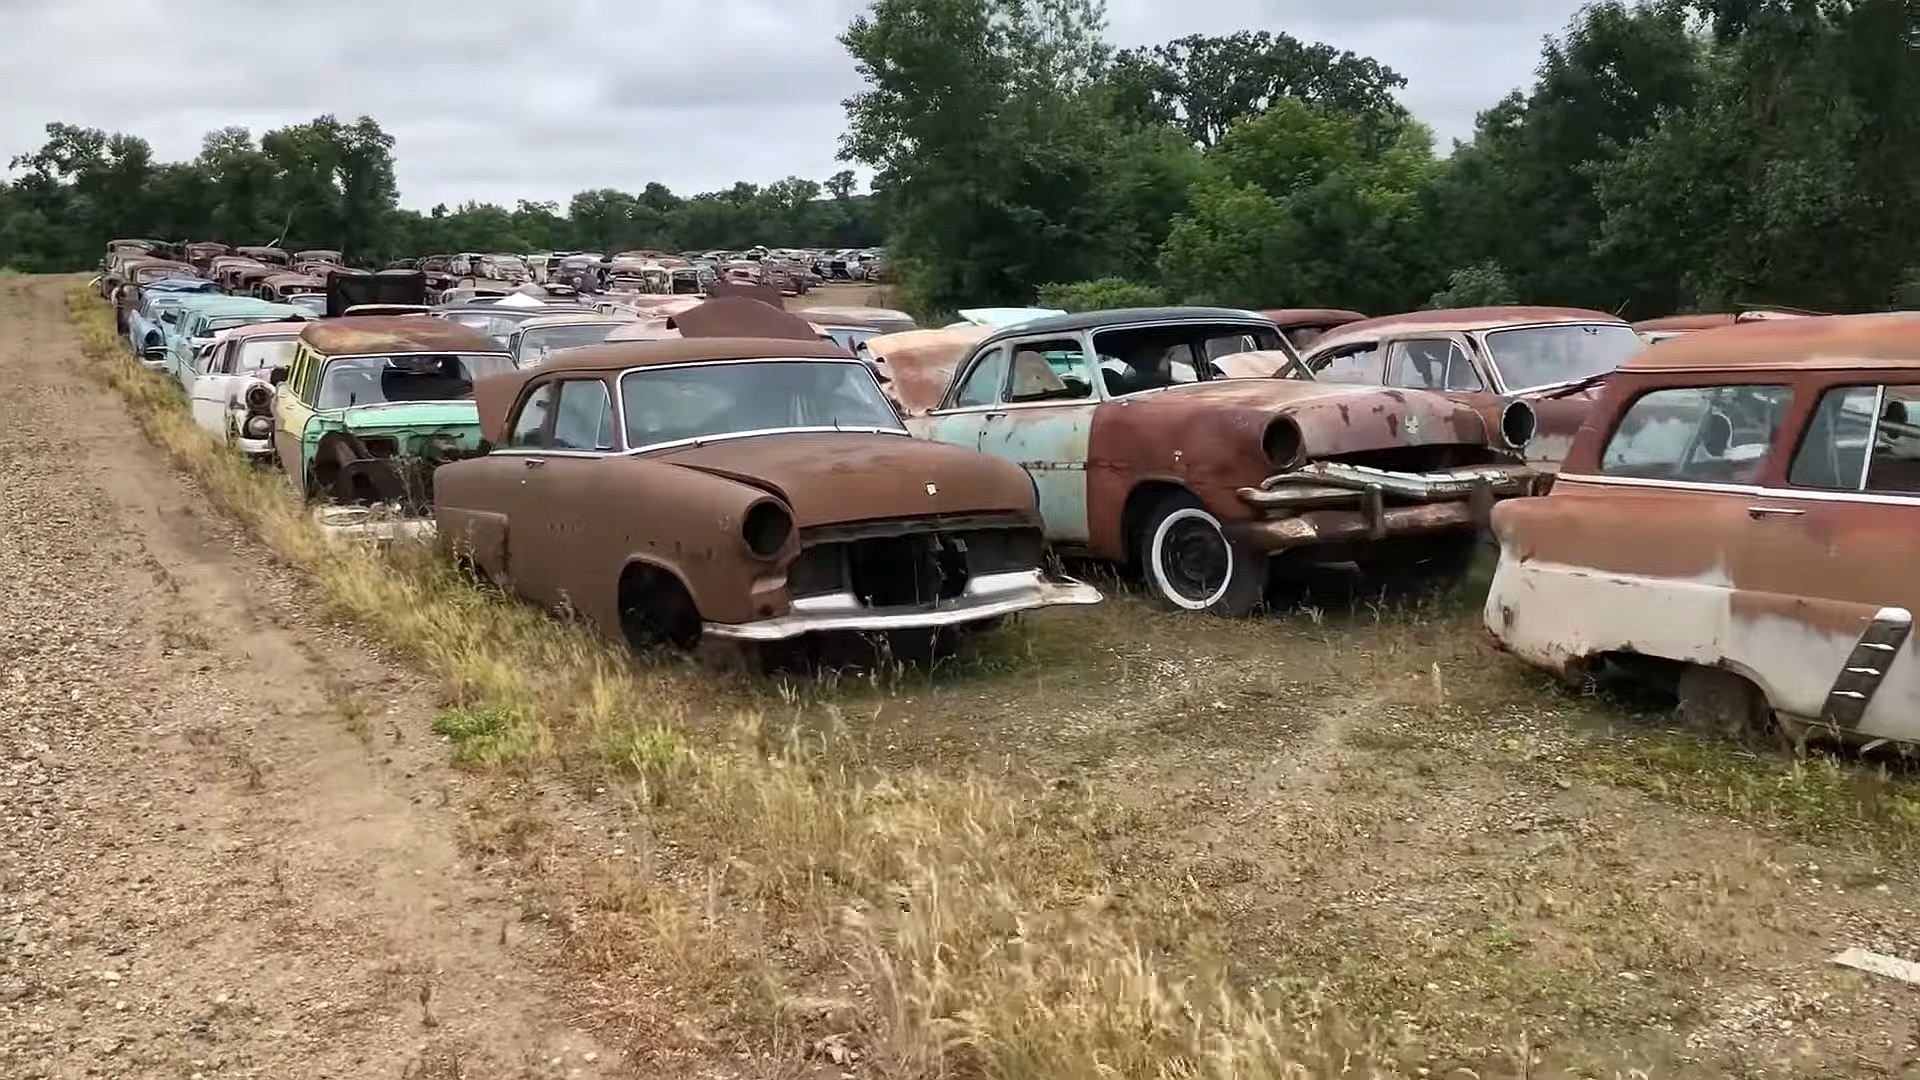 Massive Junkyard Is Home To 10000 Classic Cars Rare Gems Included 184221 1 